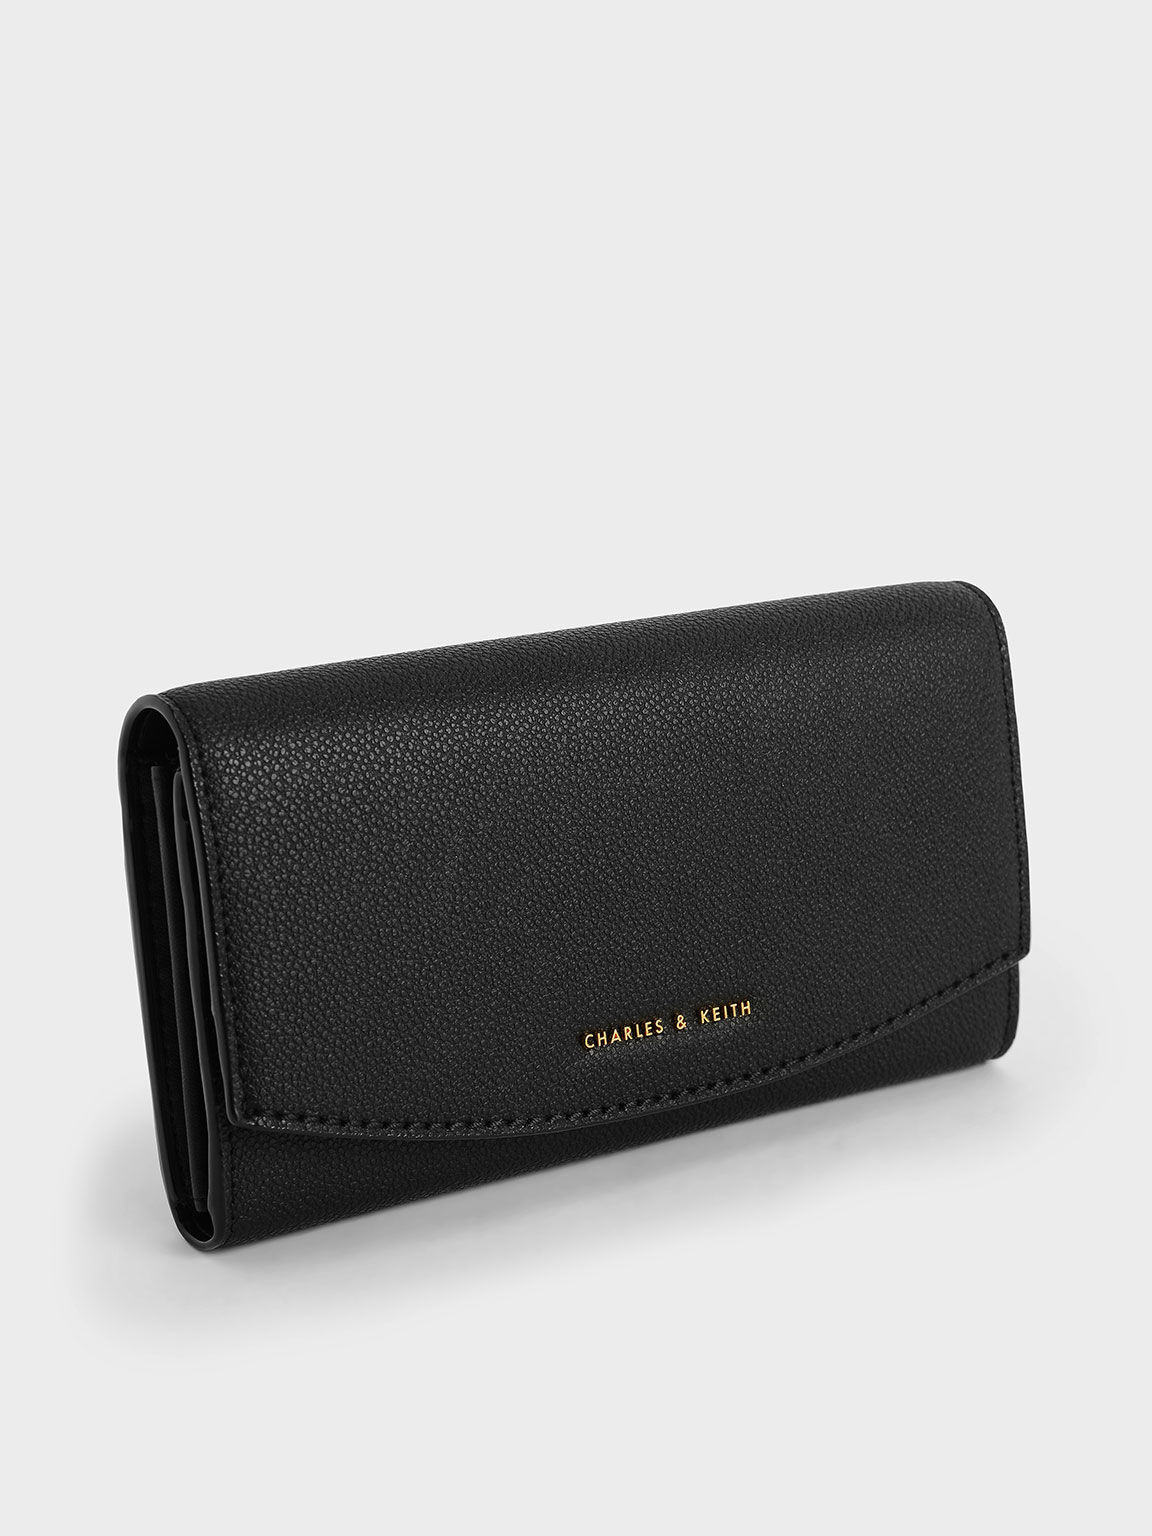 Charles & Keith Front Flap Wallet in Black White Womens Wallets and cardholders Charles & Keith Wallets and cardholders 